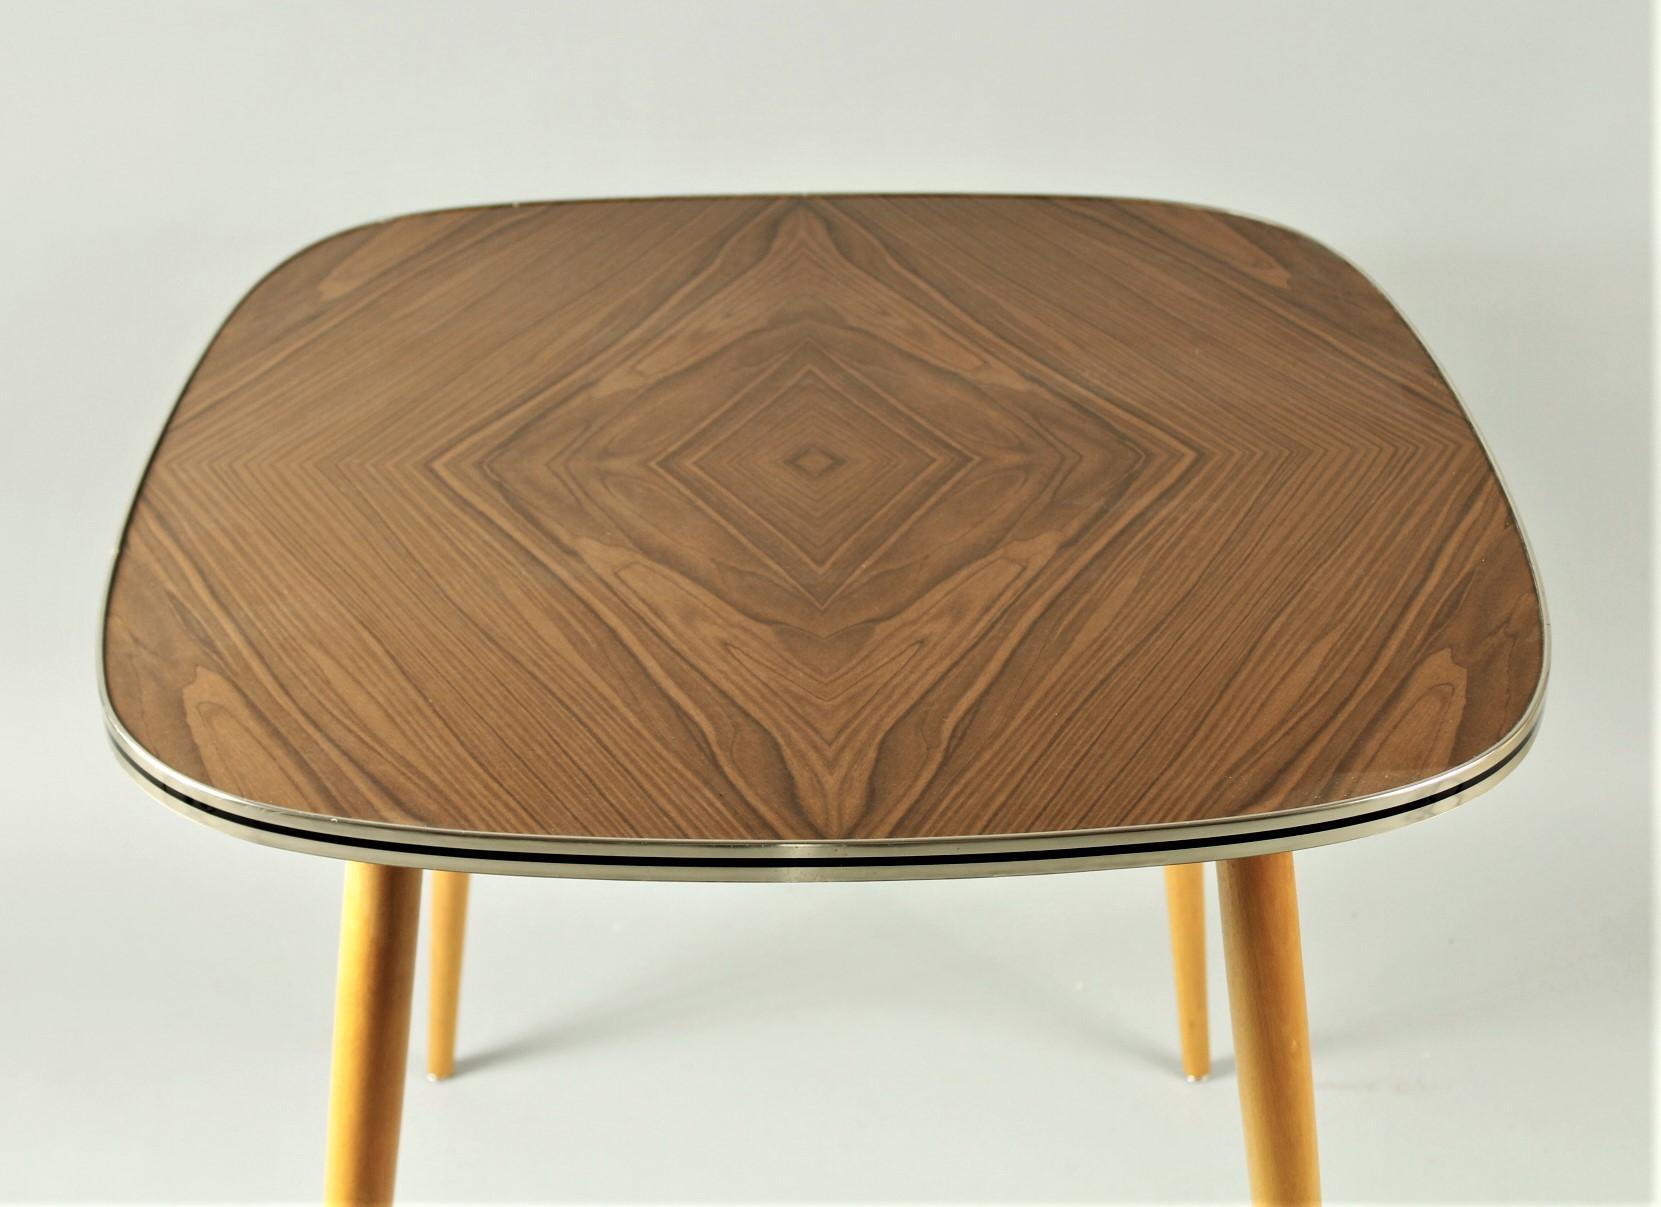 German coffee or side table with formica table top from the 1960s.